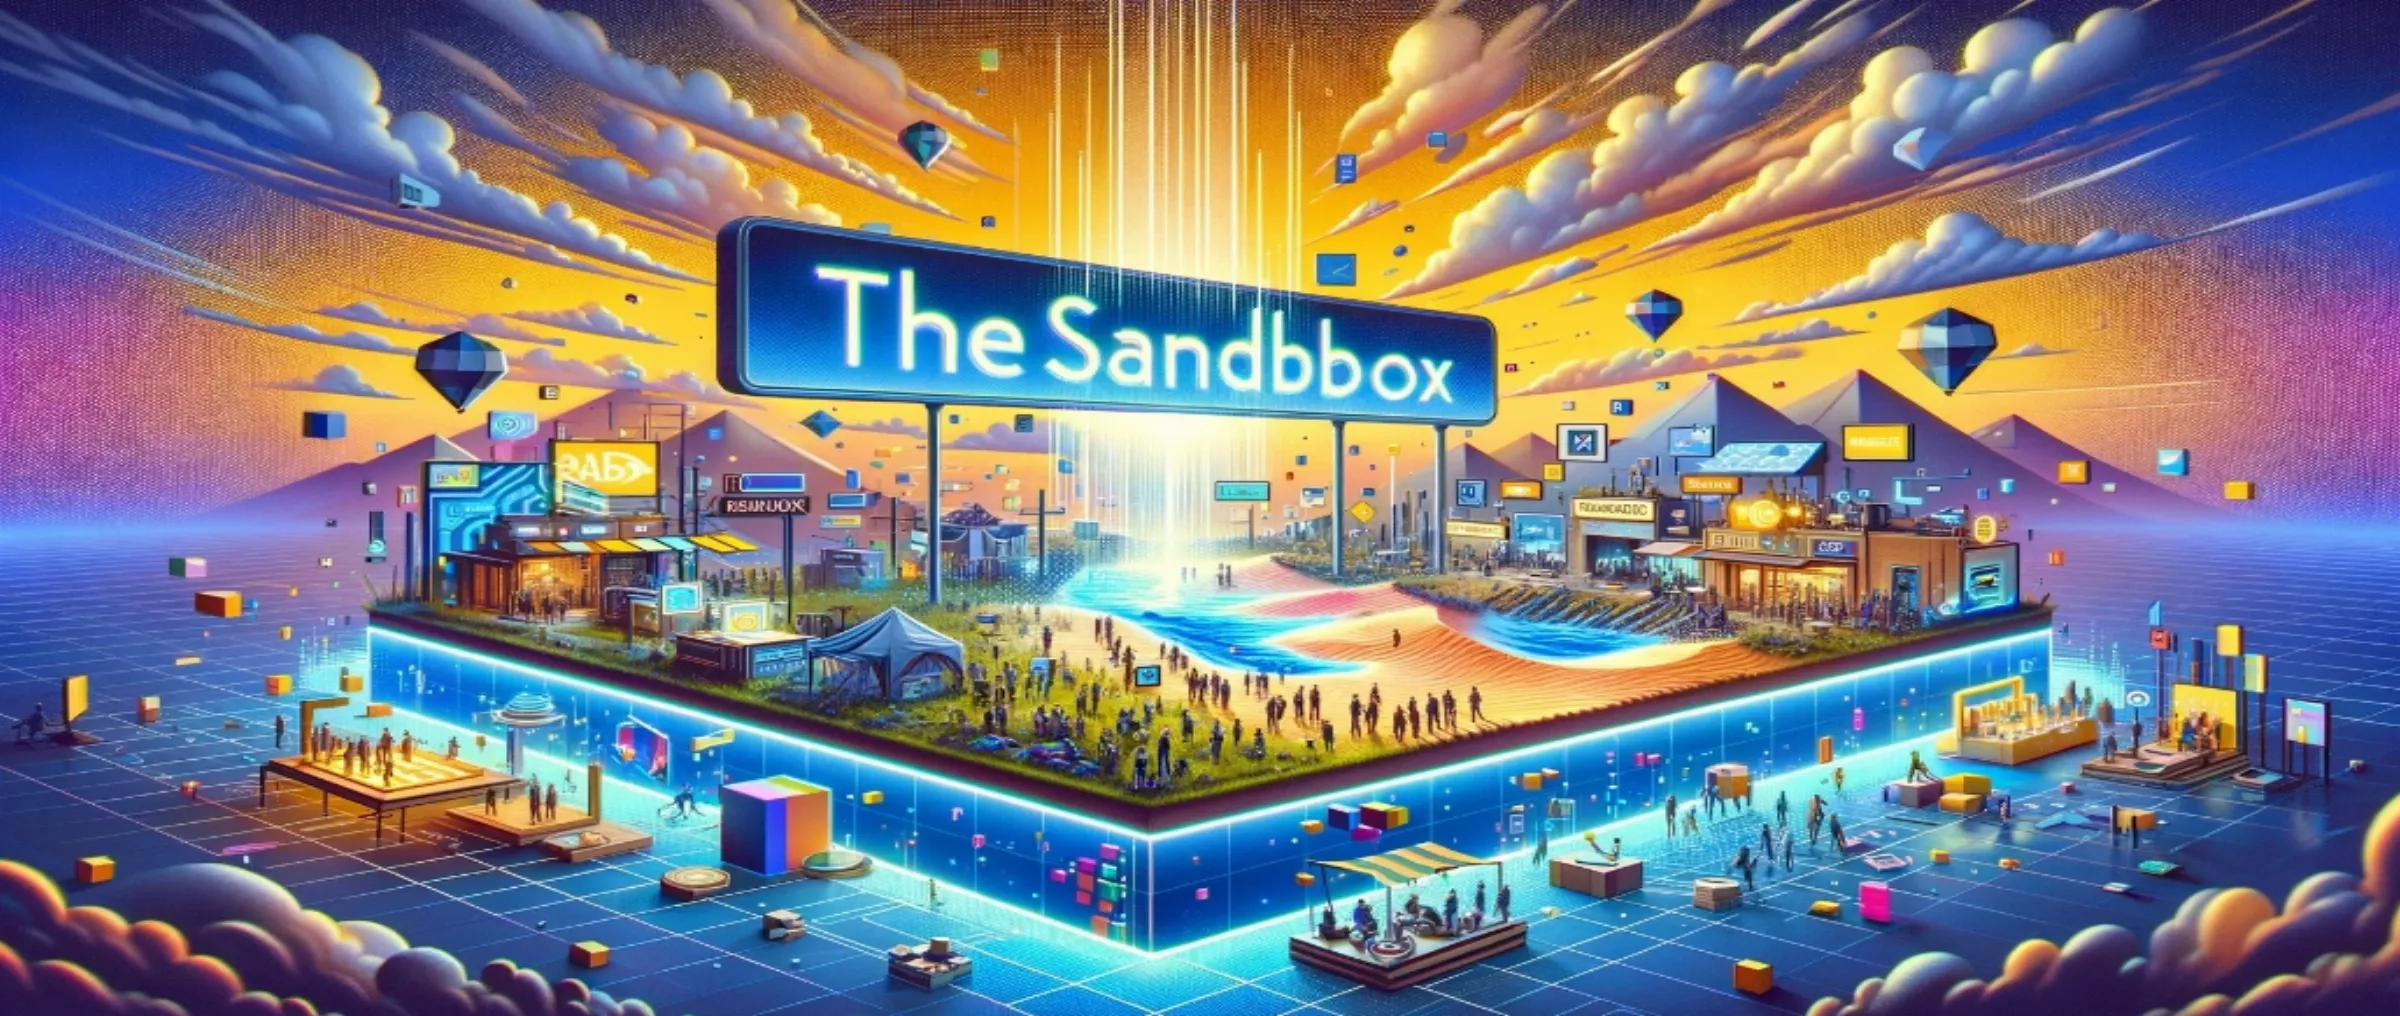 Collaborations with brands and artists have contributed to the rebirth of The Sandbox